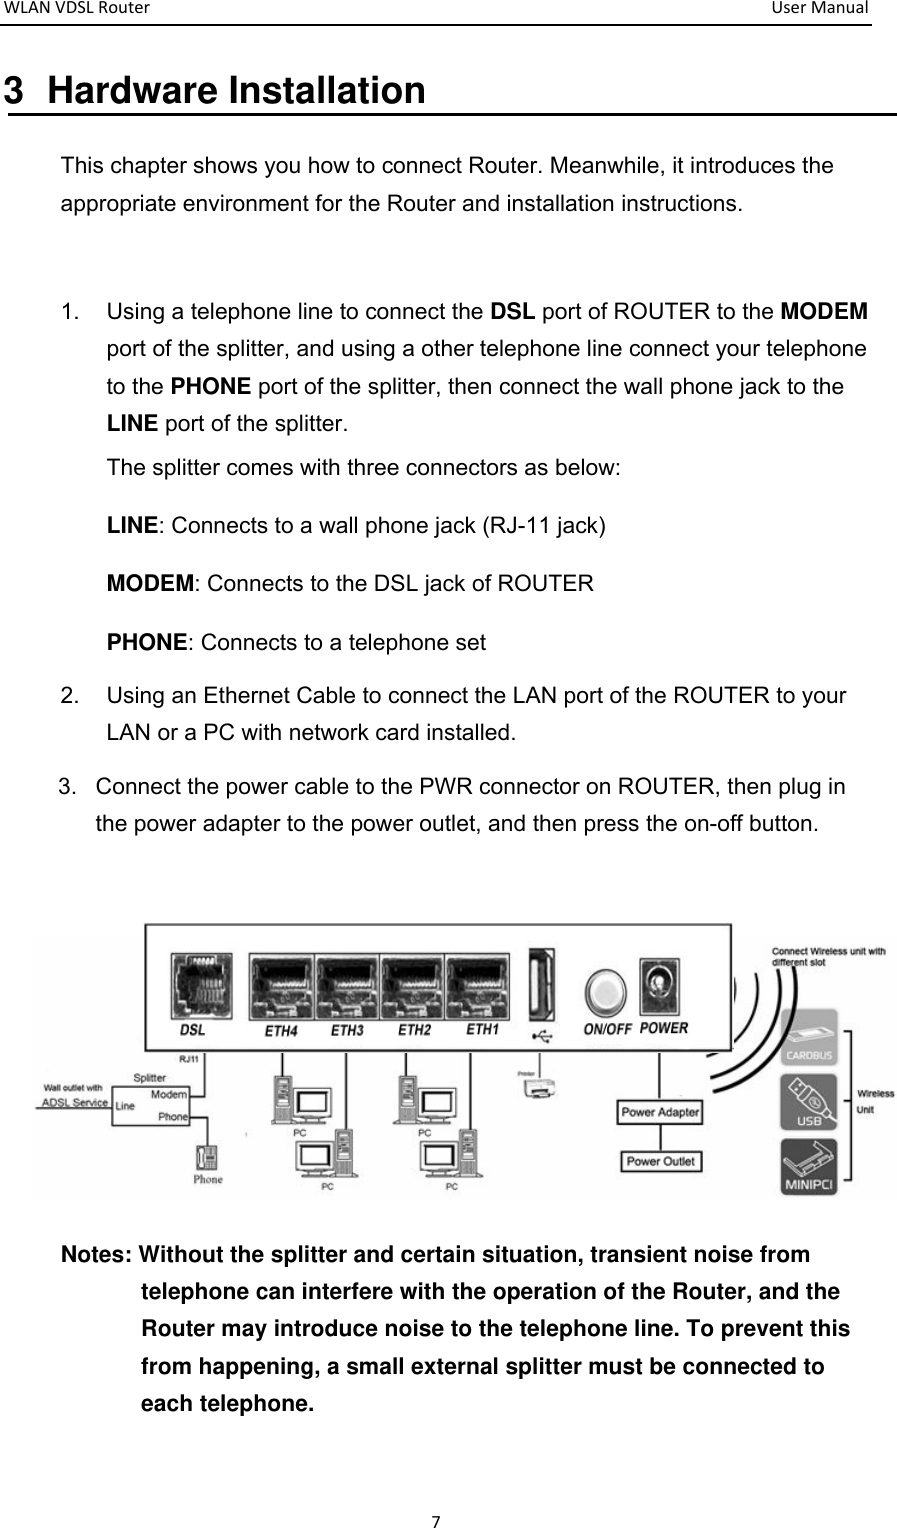 WLANVDSLRouter  UserManual73 Hardware Installation This chapter shows you how to connect Router. Meanwhile, it introduces the appropriate environment for the Router and installation instructions.    1.  Using a telephone line to connect the DSL port of ROUTER to the MODEM port of the splitter, and using a other telephone line connect your telephone to the PHONE port of the splitter, then connect the wall phone jack to the LINE port of the splitter. The splitter comes with three connectors as below: LINE: Connects to a wall phone jack (RJ-11 jack) MODEM: Connects to the DSL jack of ROUTER PHONE: Connects to a telephone set 2.  Using an Ethernet Cable to connect the LAN port of the ROUTER to your LAN or a PC with network card installed. 3.  Connect the power cable to the PWR connector on ROUTER, then plug in the power adapter to the power outlet, and then press the on-off button.   Notes: Without the splitter and certain situation, transient noise from telephone can interfere with the operation of the Router, and the Router may introduce noise to the telephone line. To prevent this from happening, a small external splitter must be connected to each telephone. 